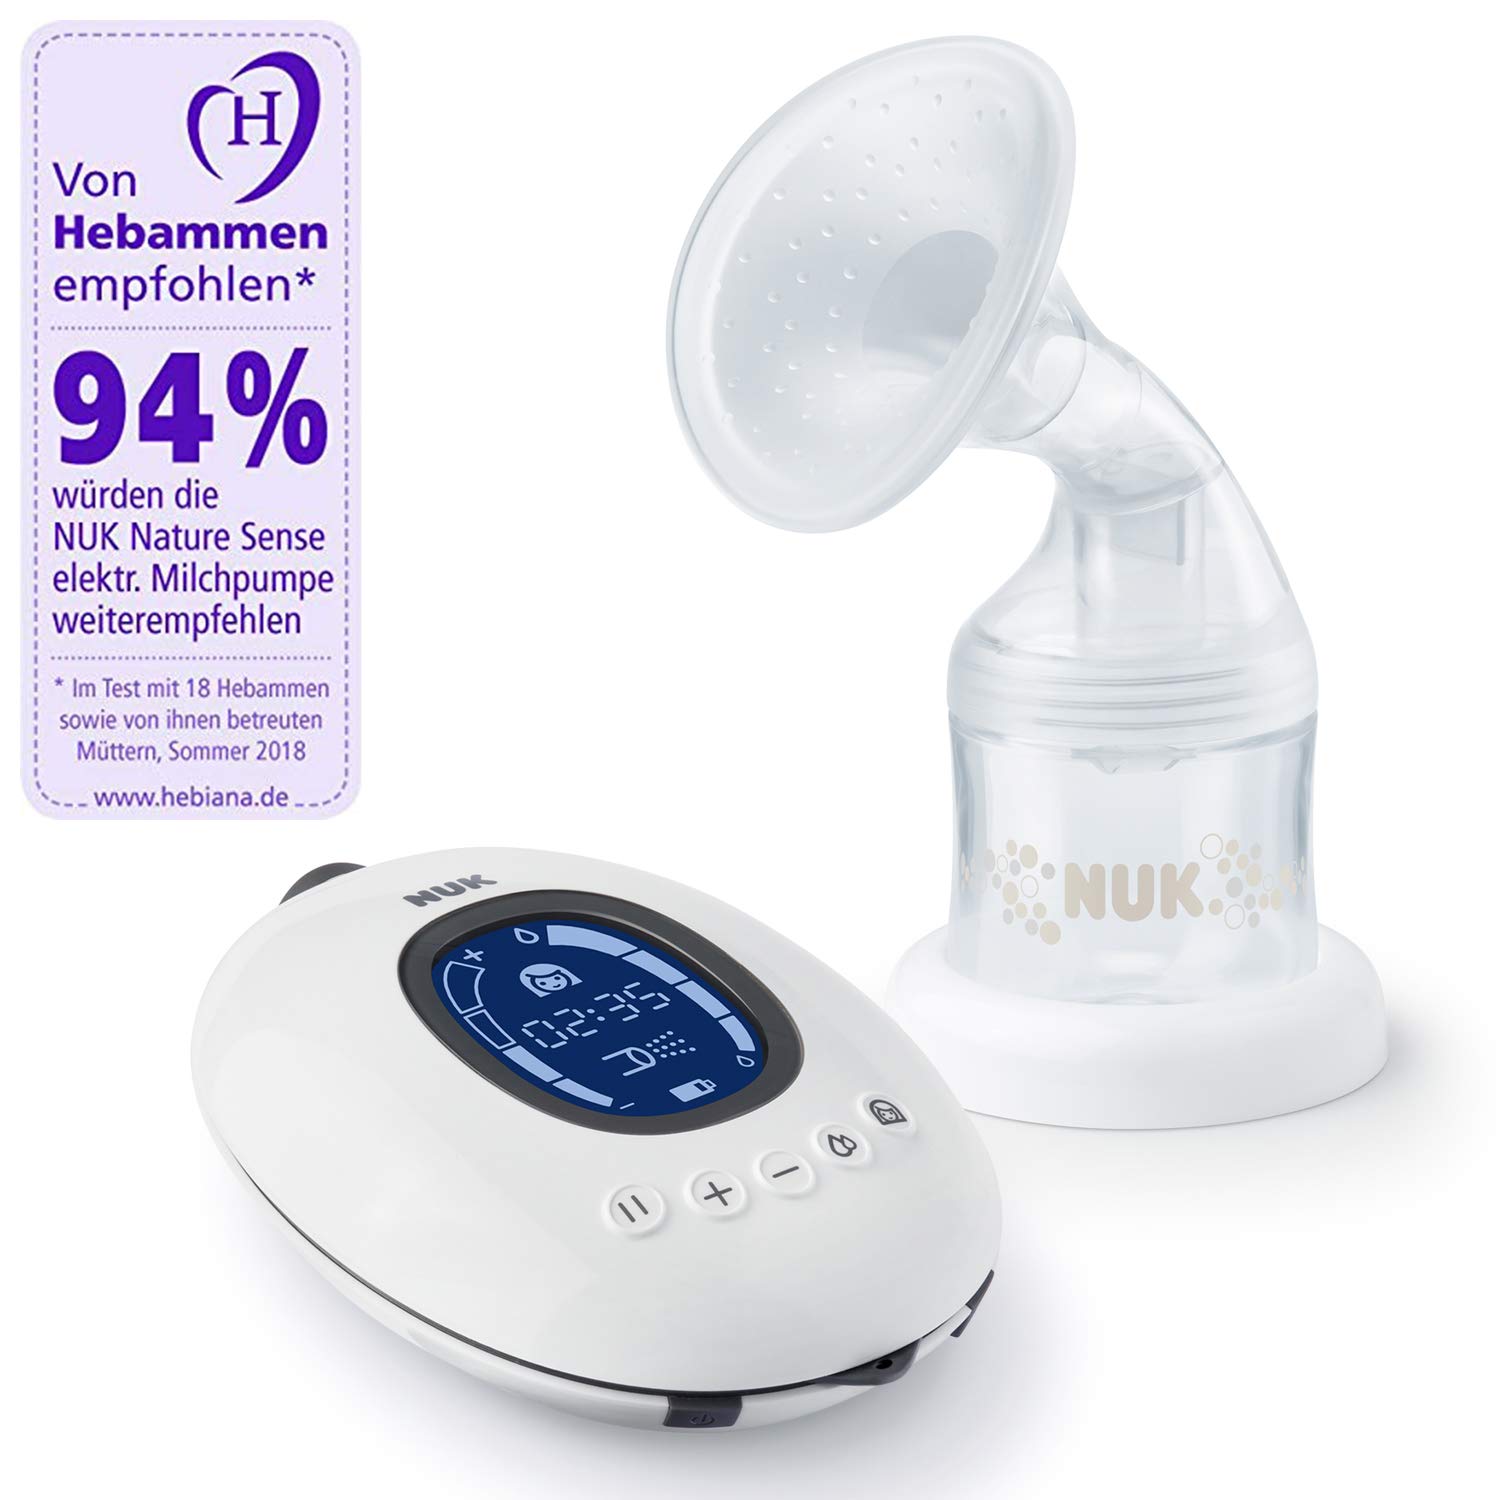 NUK Nature Sense Electric Breast Pump with Battery, LCD Display and Memory Function, Includes Breast Milk Container, 150 ml